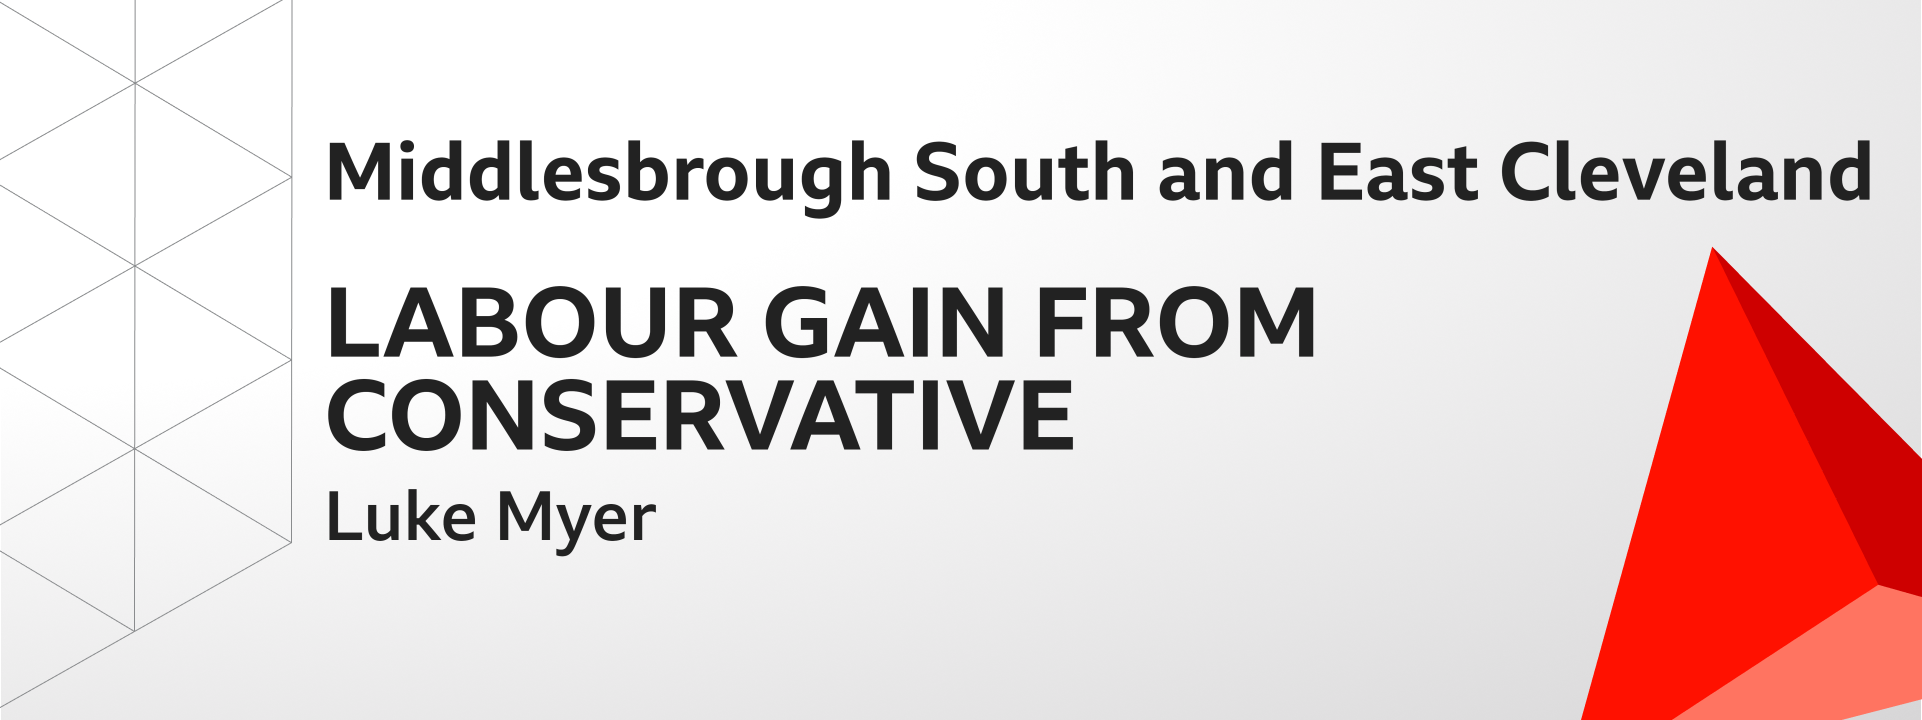 Graphic showing Labour gains Middlesbrough South and East Cleveland from the Conservatives. The winning candidate was Luke Myer.